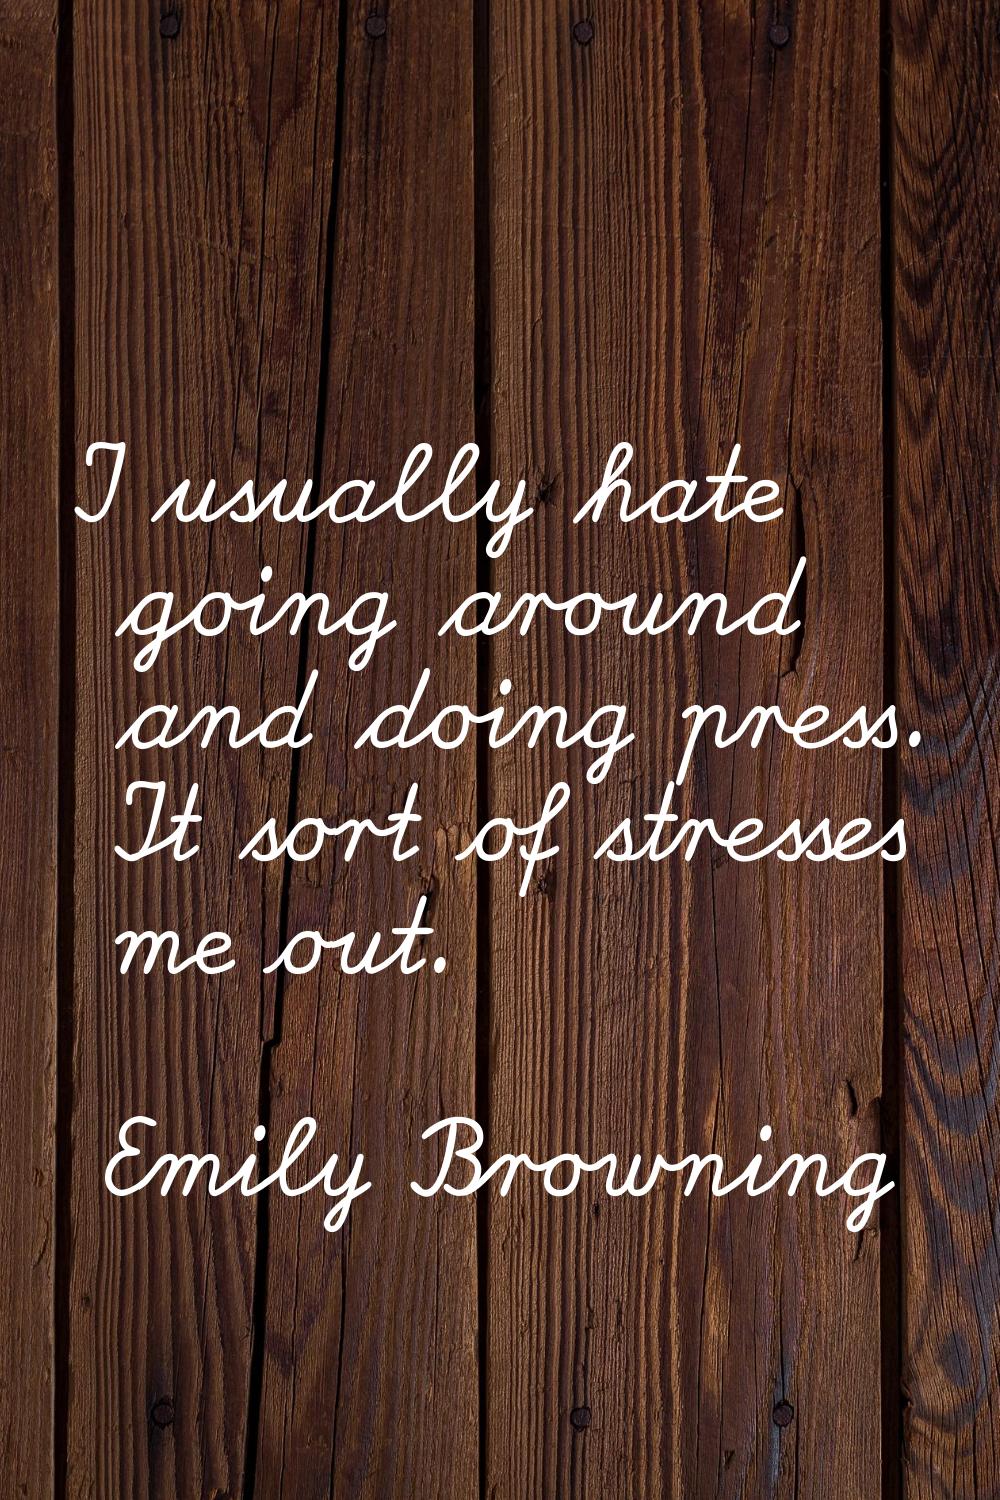 I usually hate going around and doing press. It sort of stresses me out.